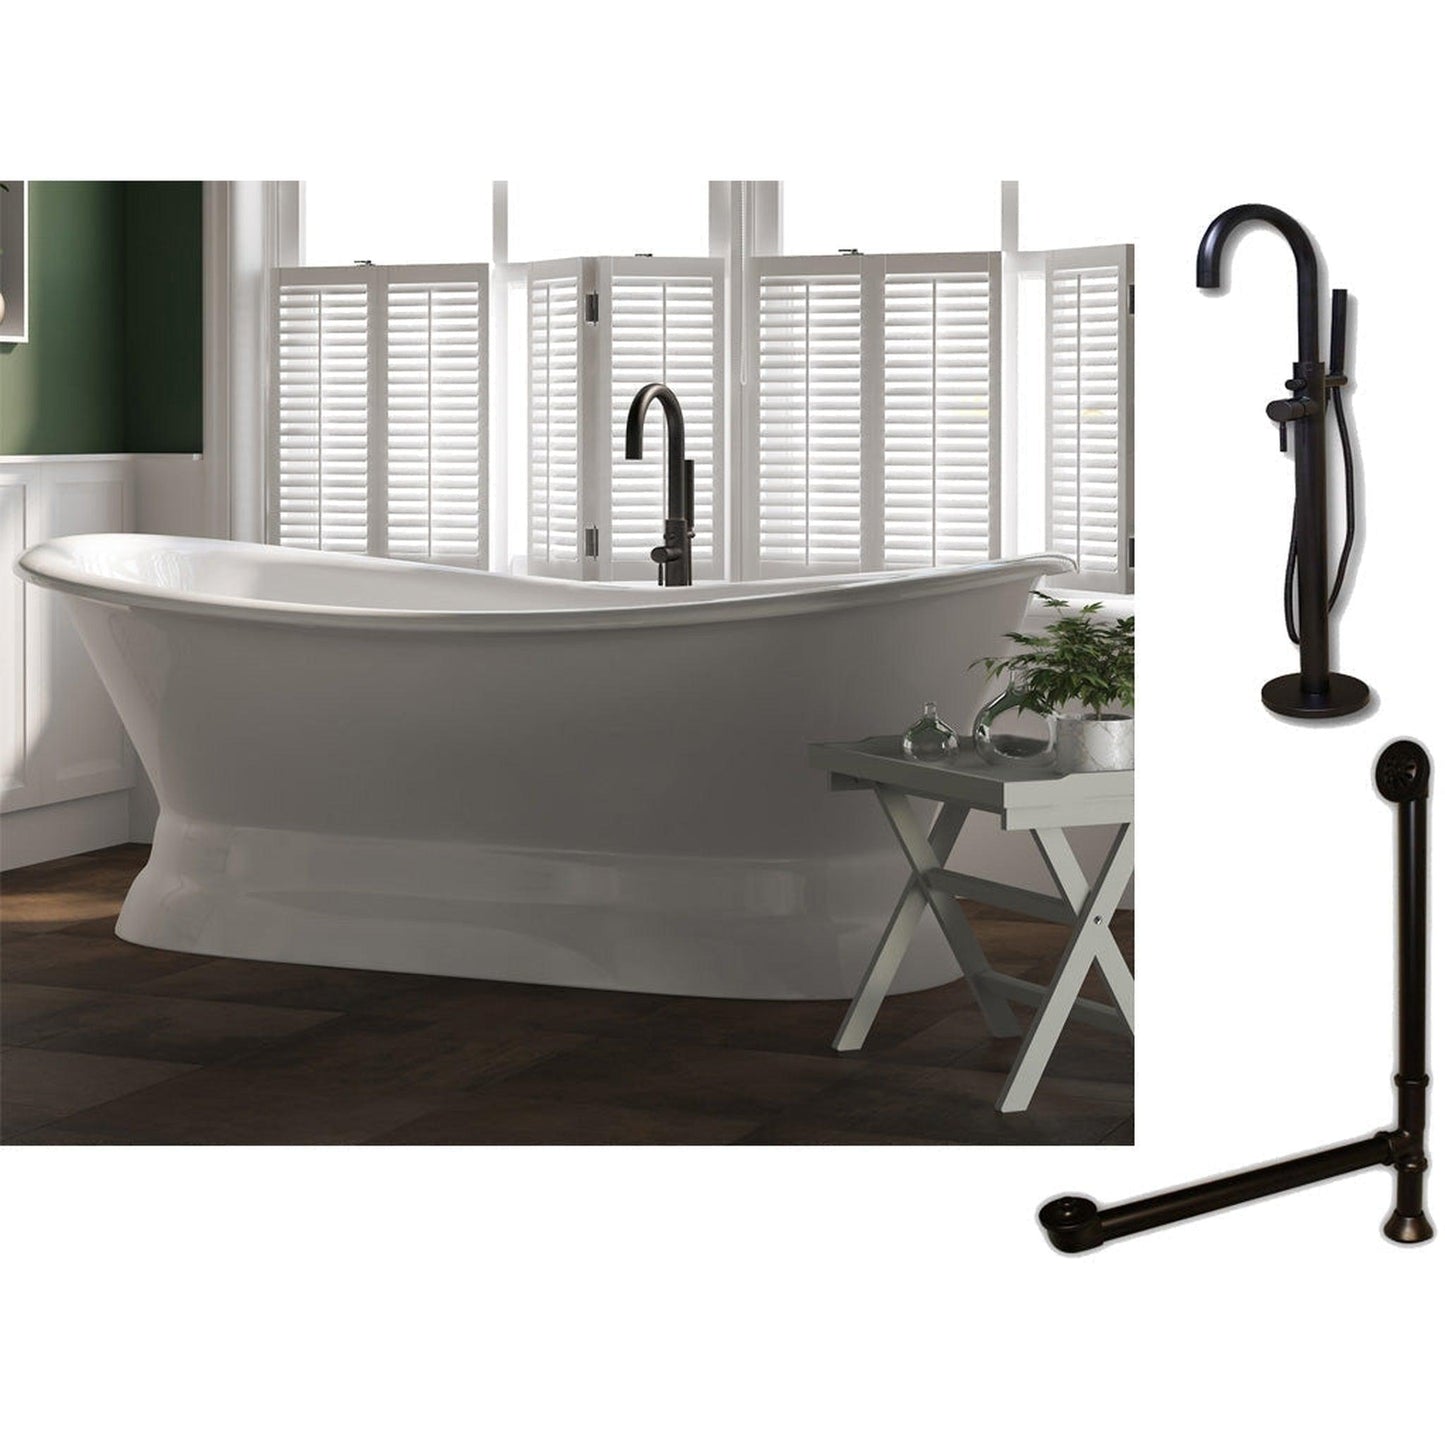 Cambridge Plumbing 71" White Cast Iron Double Slipper Pedestal Bathtub With No Faucet Holes And Complete Plumbing Package Including Modern Floor Mounted Faucet, Drain And Overflow Assembly In Oil Rubbed Bronze